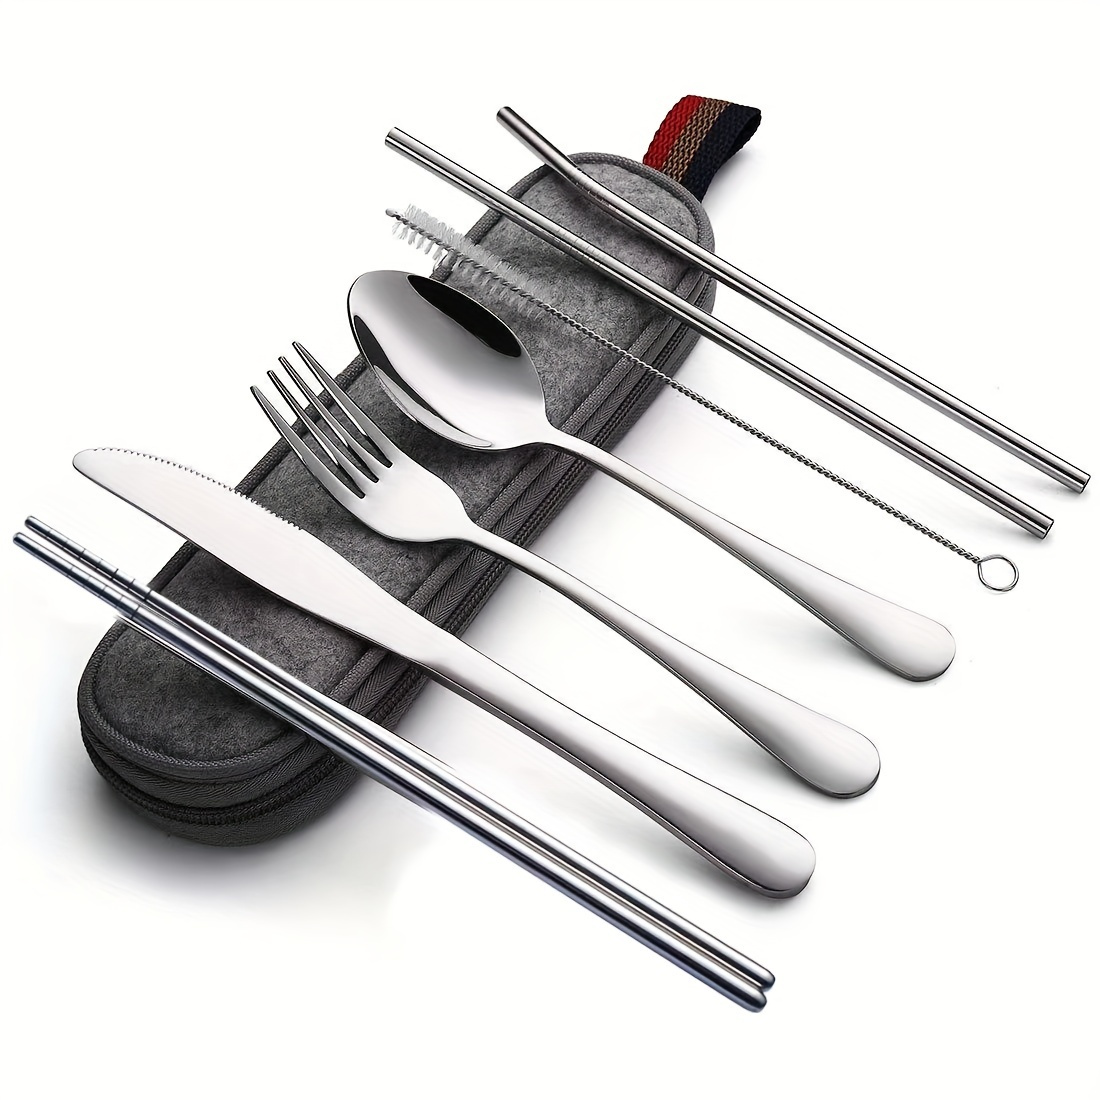 Taplord Portable Travel Silverware Set with Case, Includes 10 Pcs of Travel Utensils with Case, Stainless Steel Flatware Set for Camping, Easy to